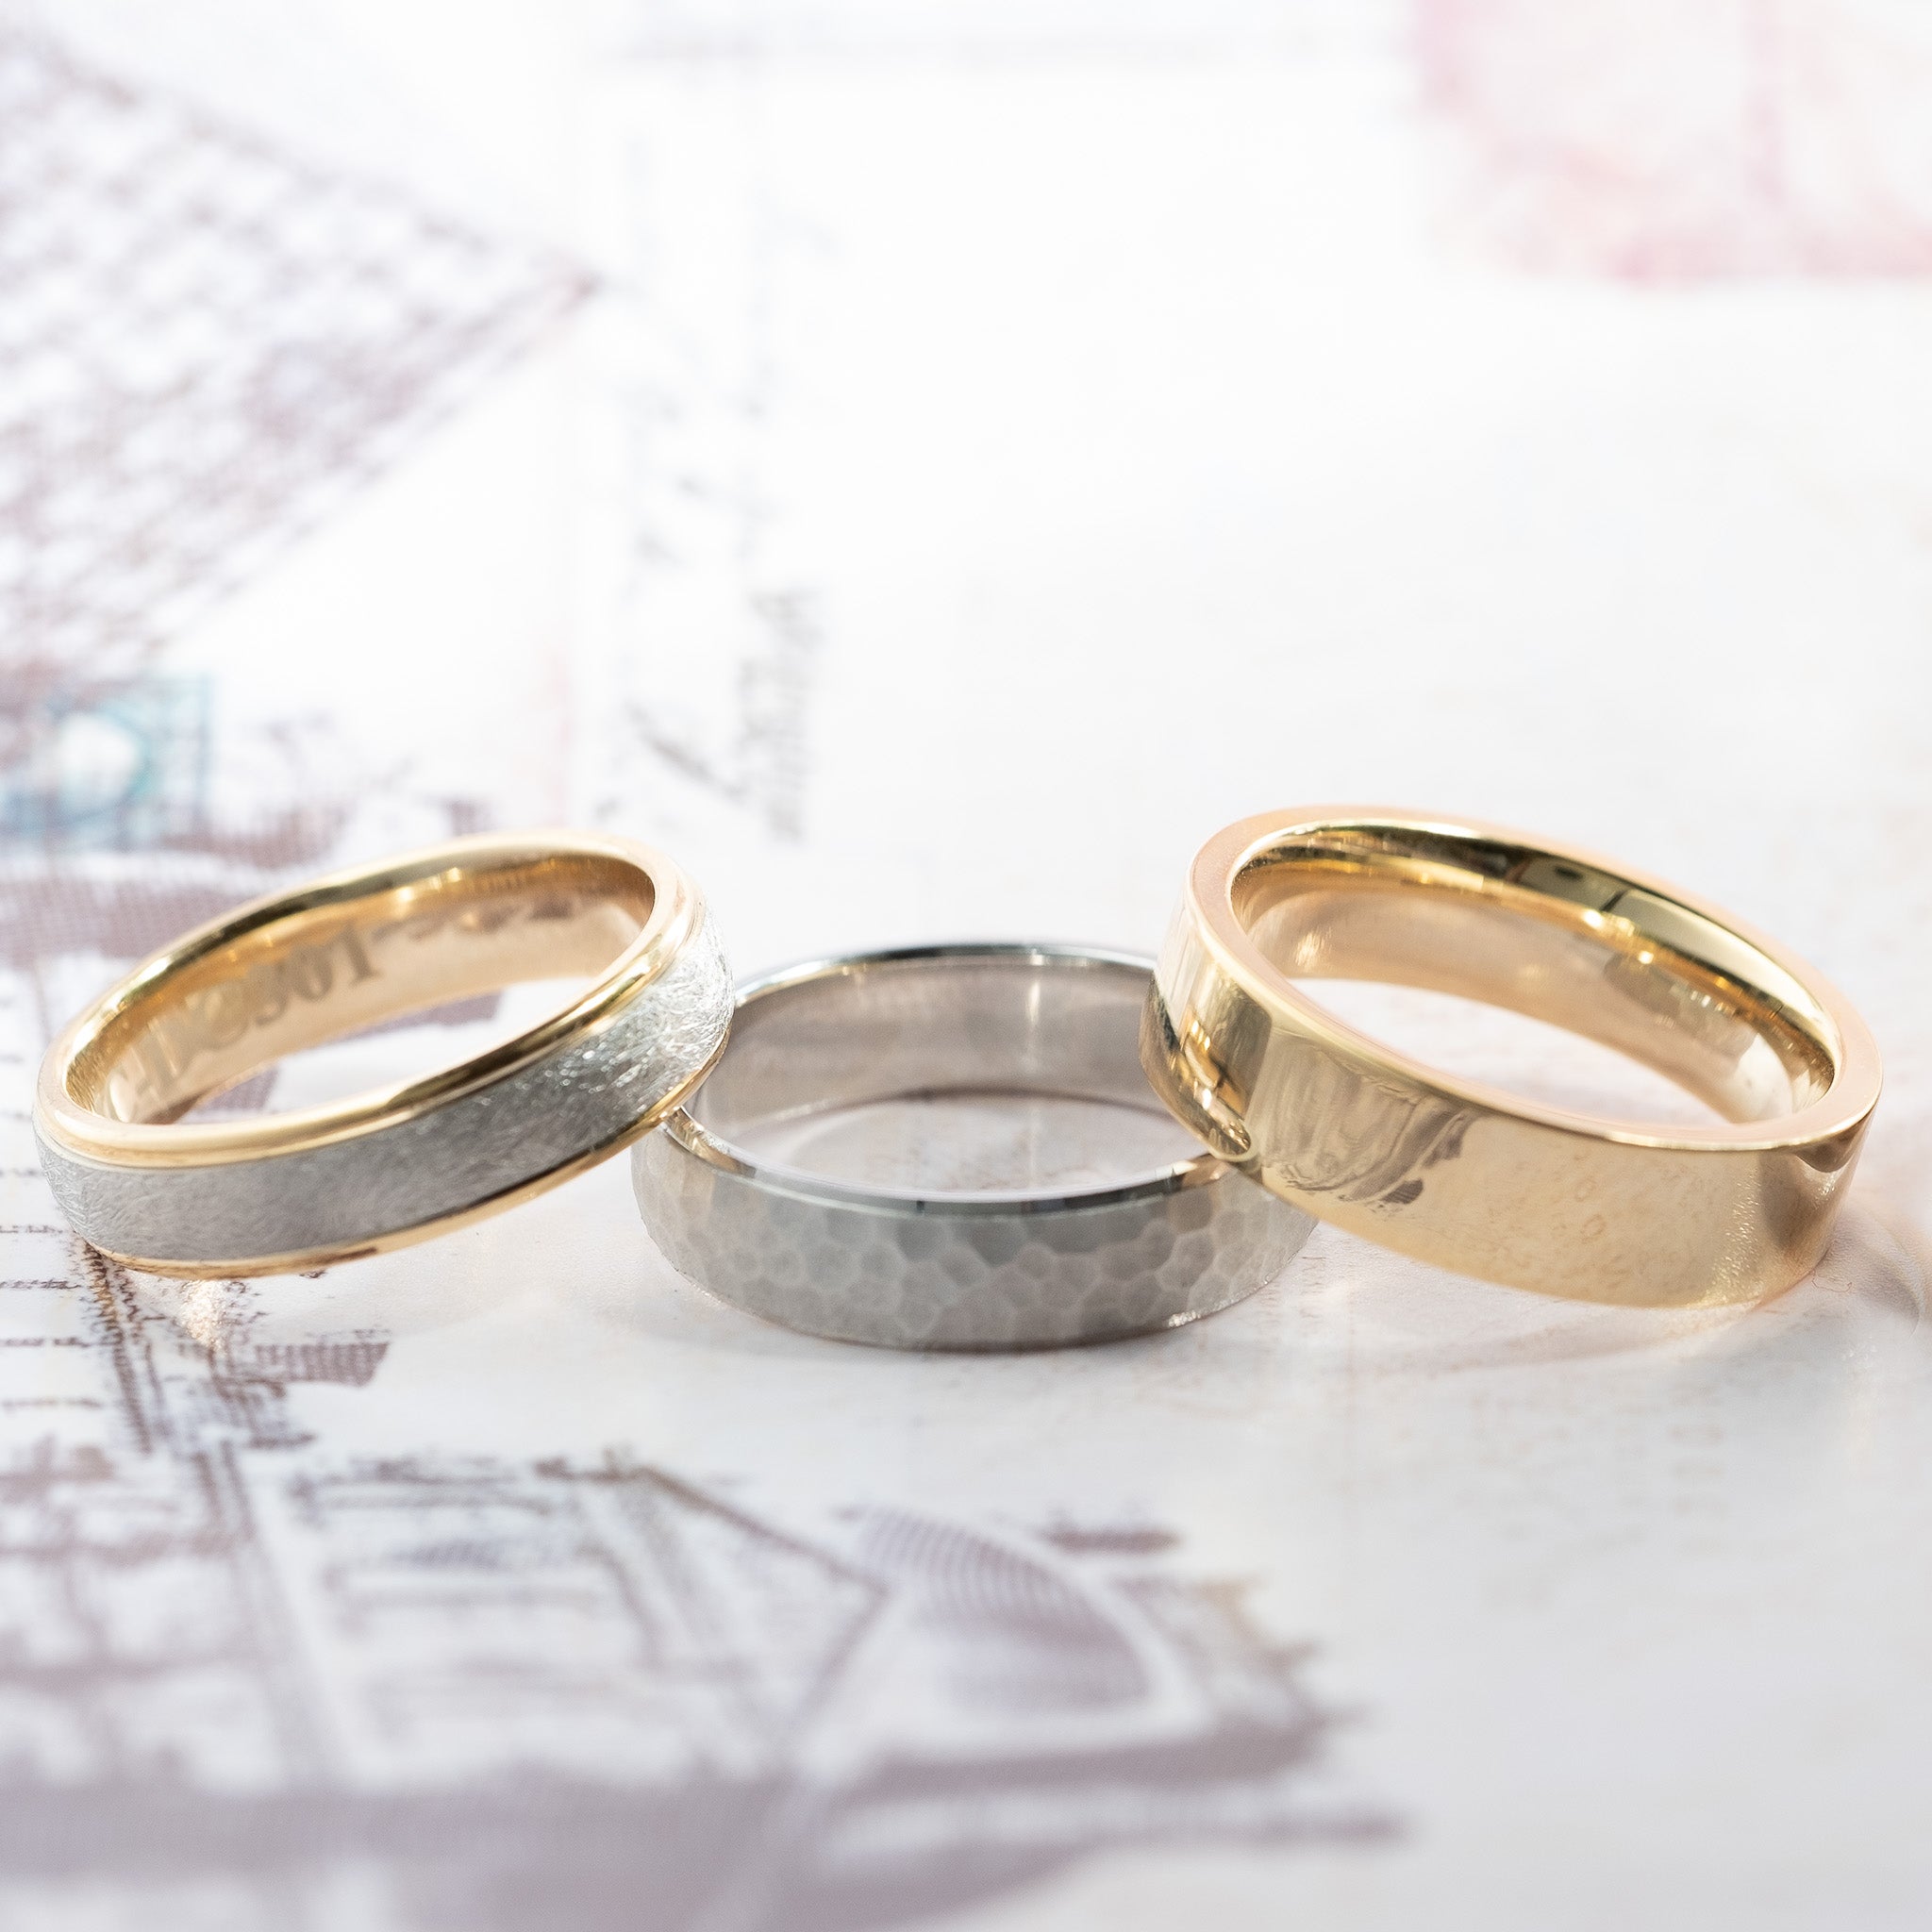 A selection of yellow and white gold wedding rings